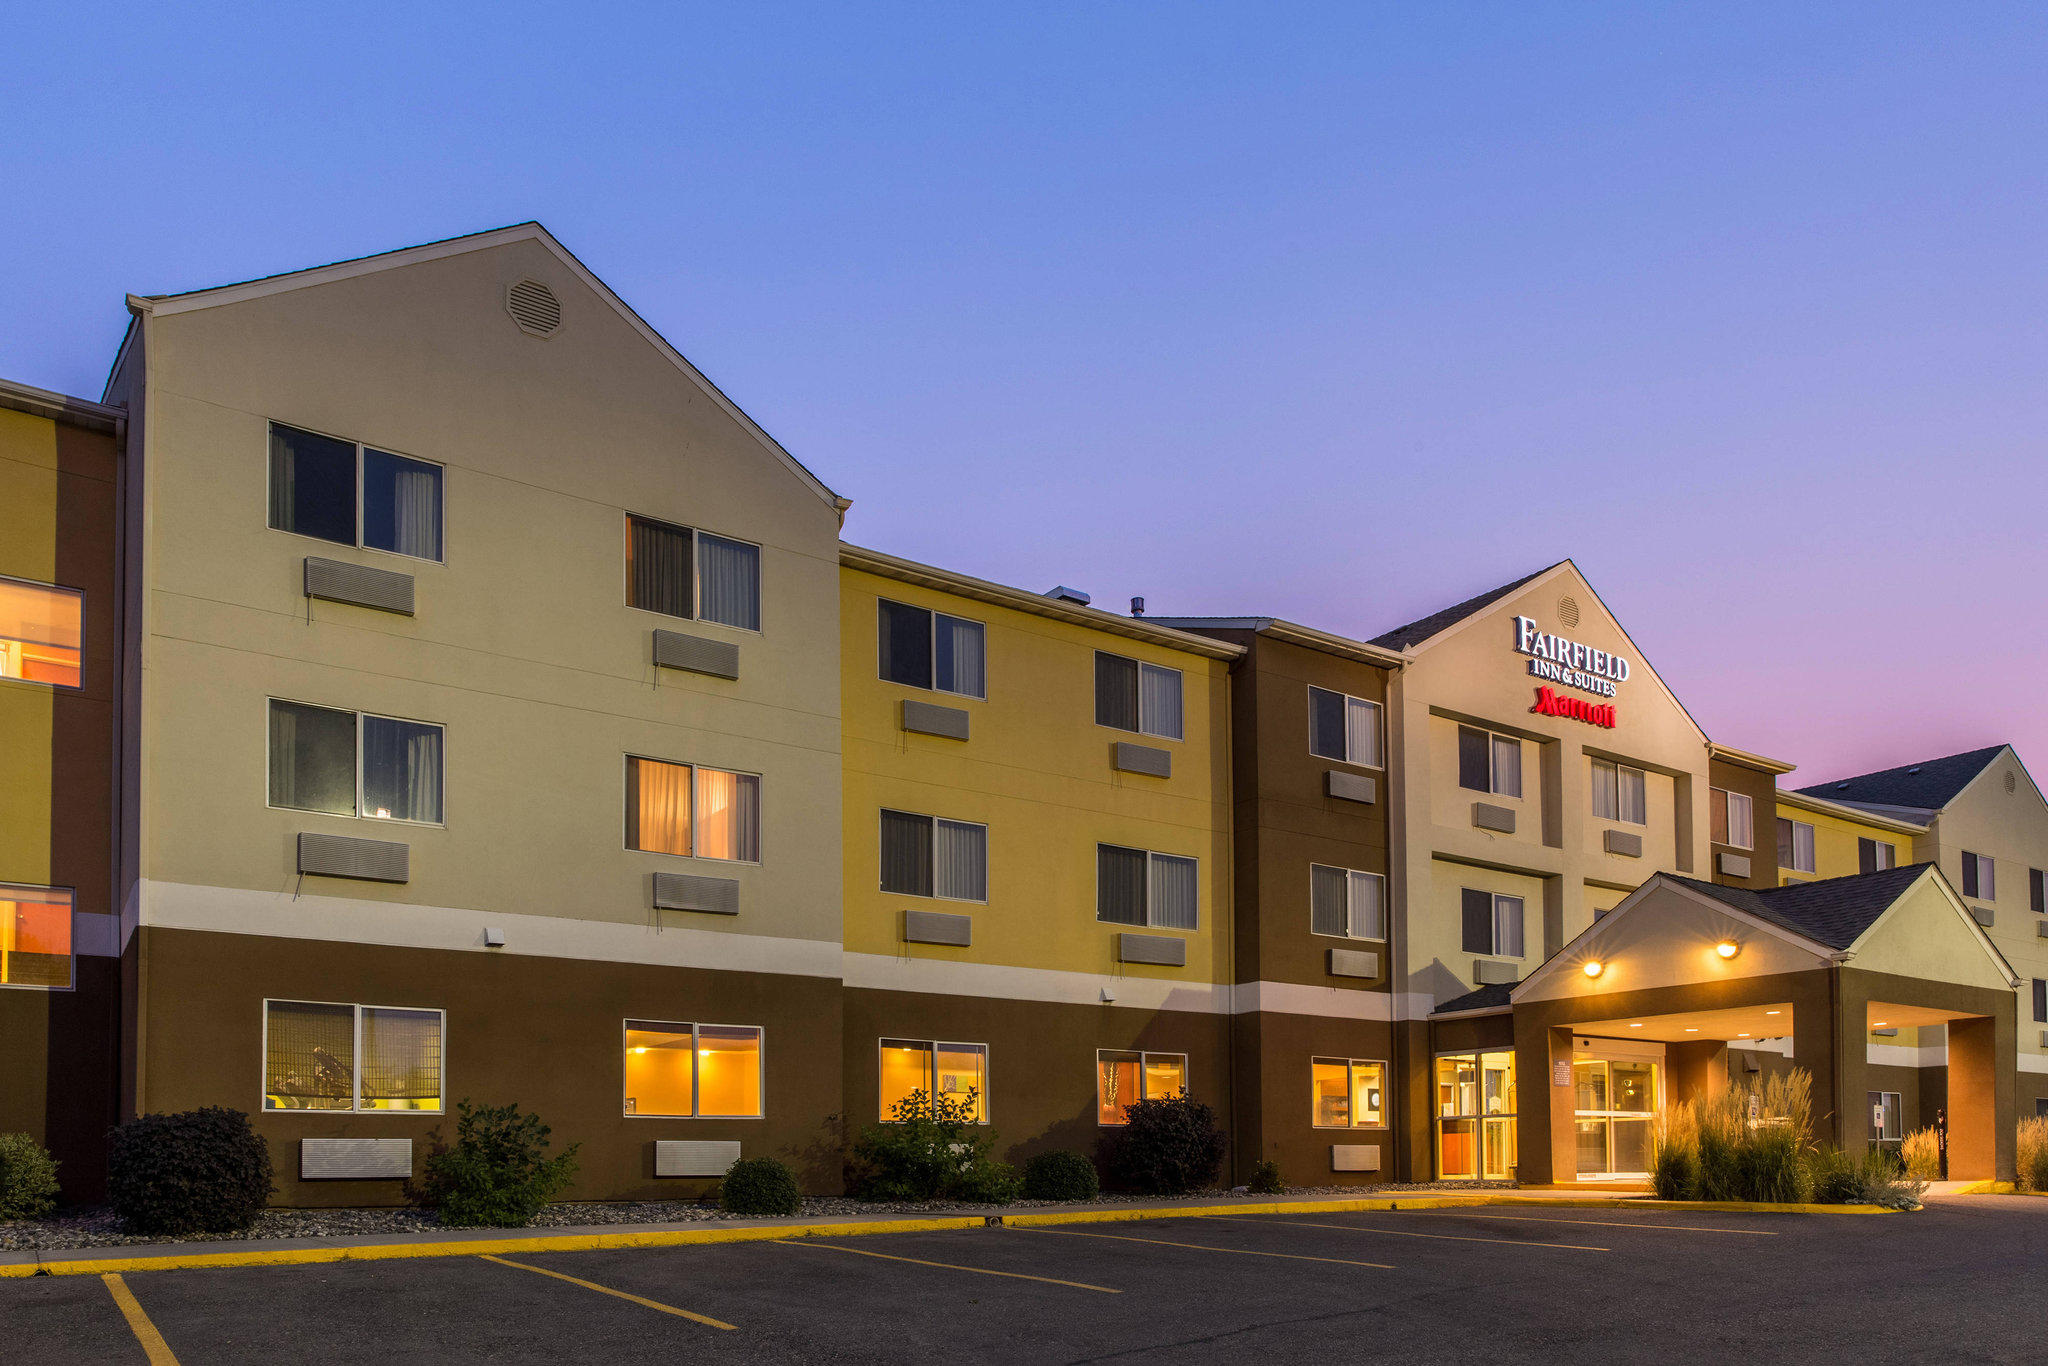 Fairfield Inn & Suites by Marriott Billings Coupons near me in Billings - What Stores Are Open For Black Friday Billings Mt Mall